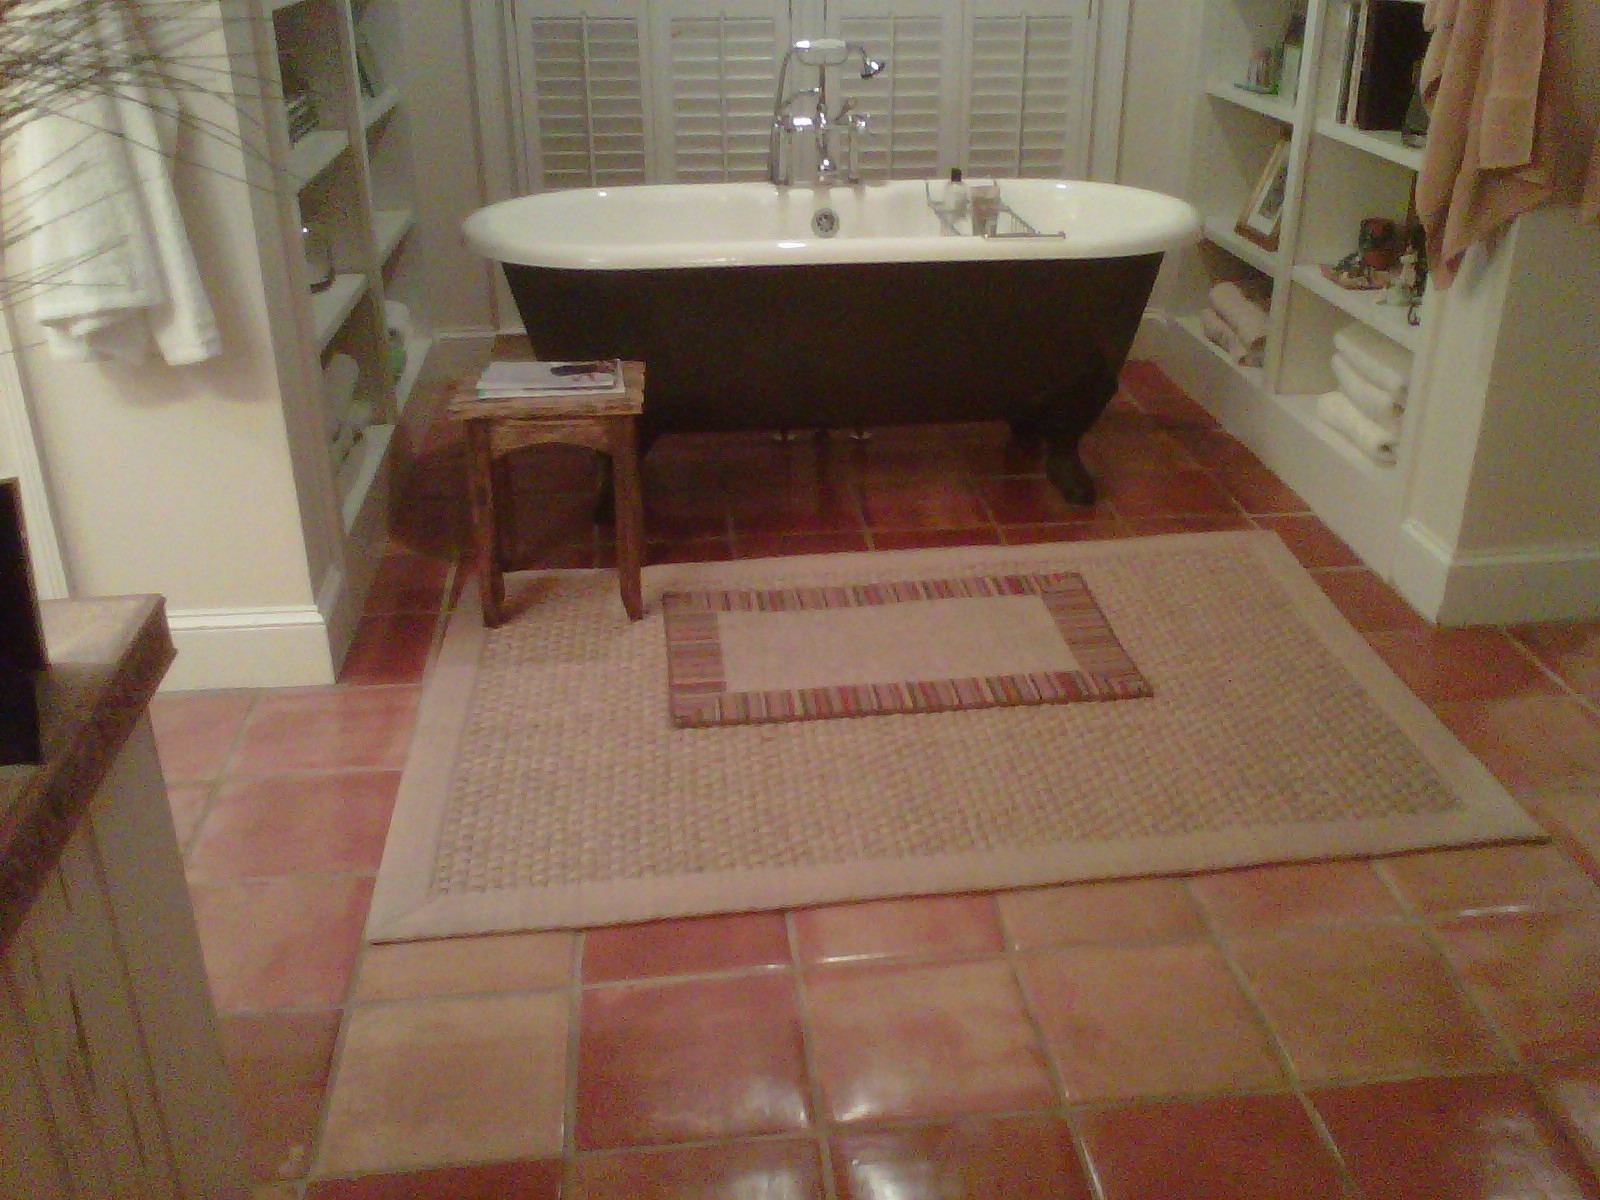 This is a lovely application of Saltillo tile in the Fleur de Lis pattern  used in the bathroom